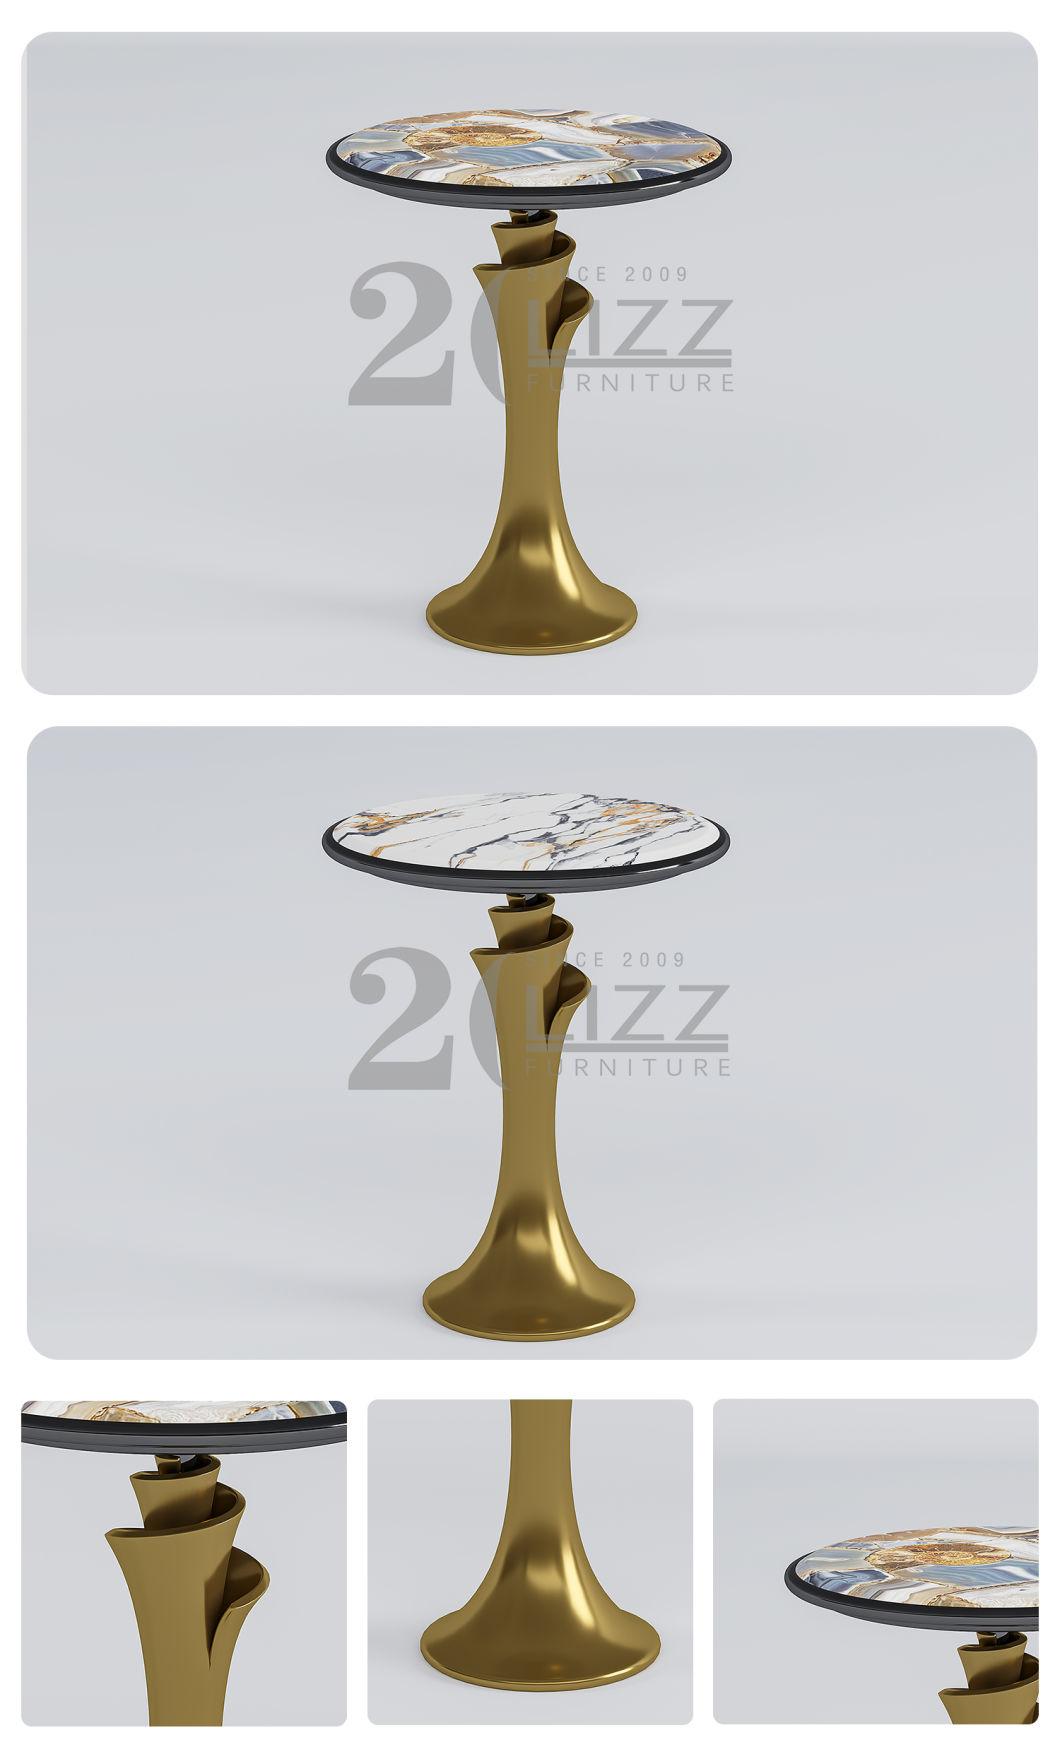 Chinese Wholesale New Design Golden Stainless Steel Feet Table Marble Top Round Console Table